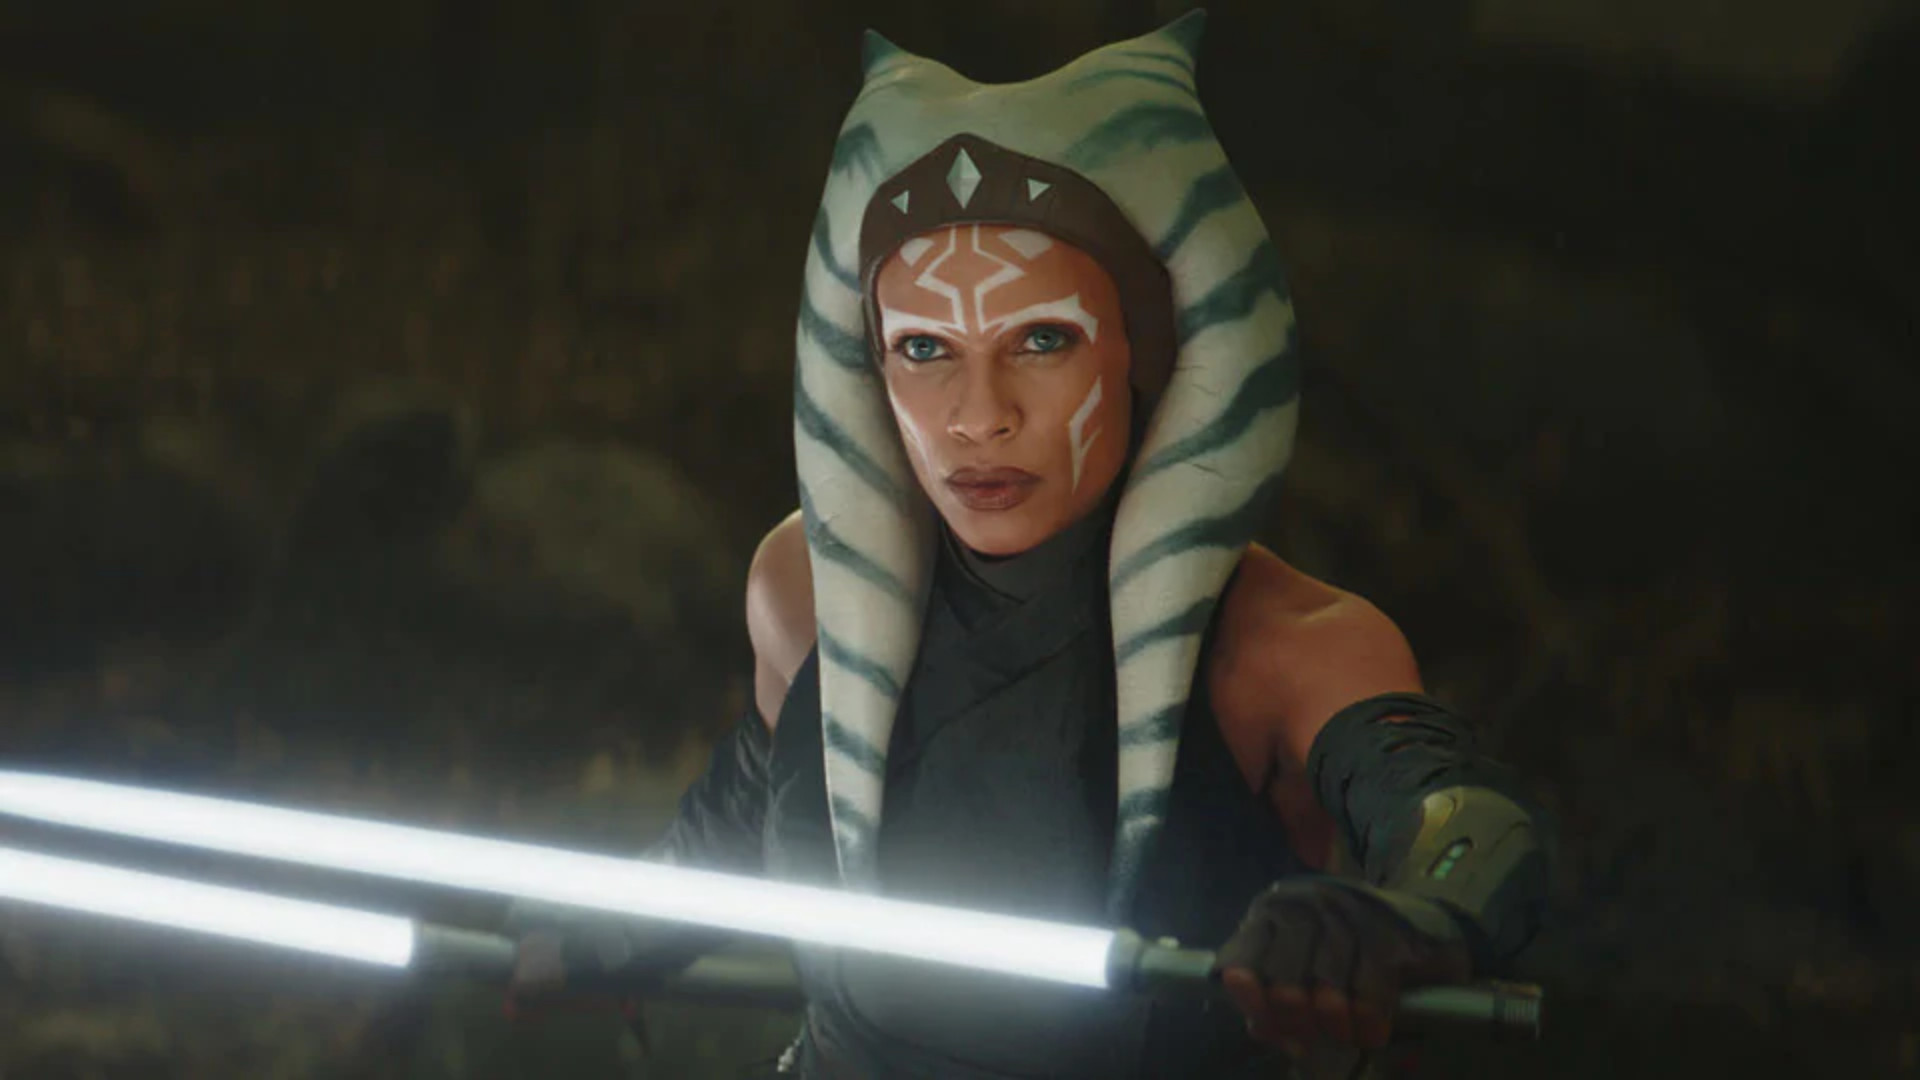 Star Wars spin-off series Ahsoka for Disney Plus has started filming